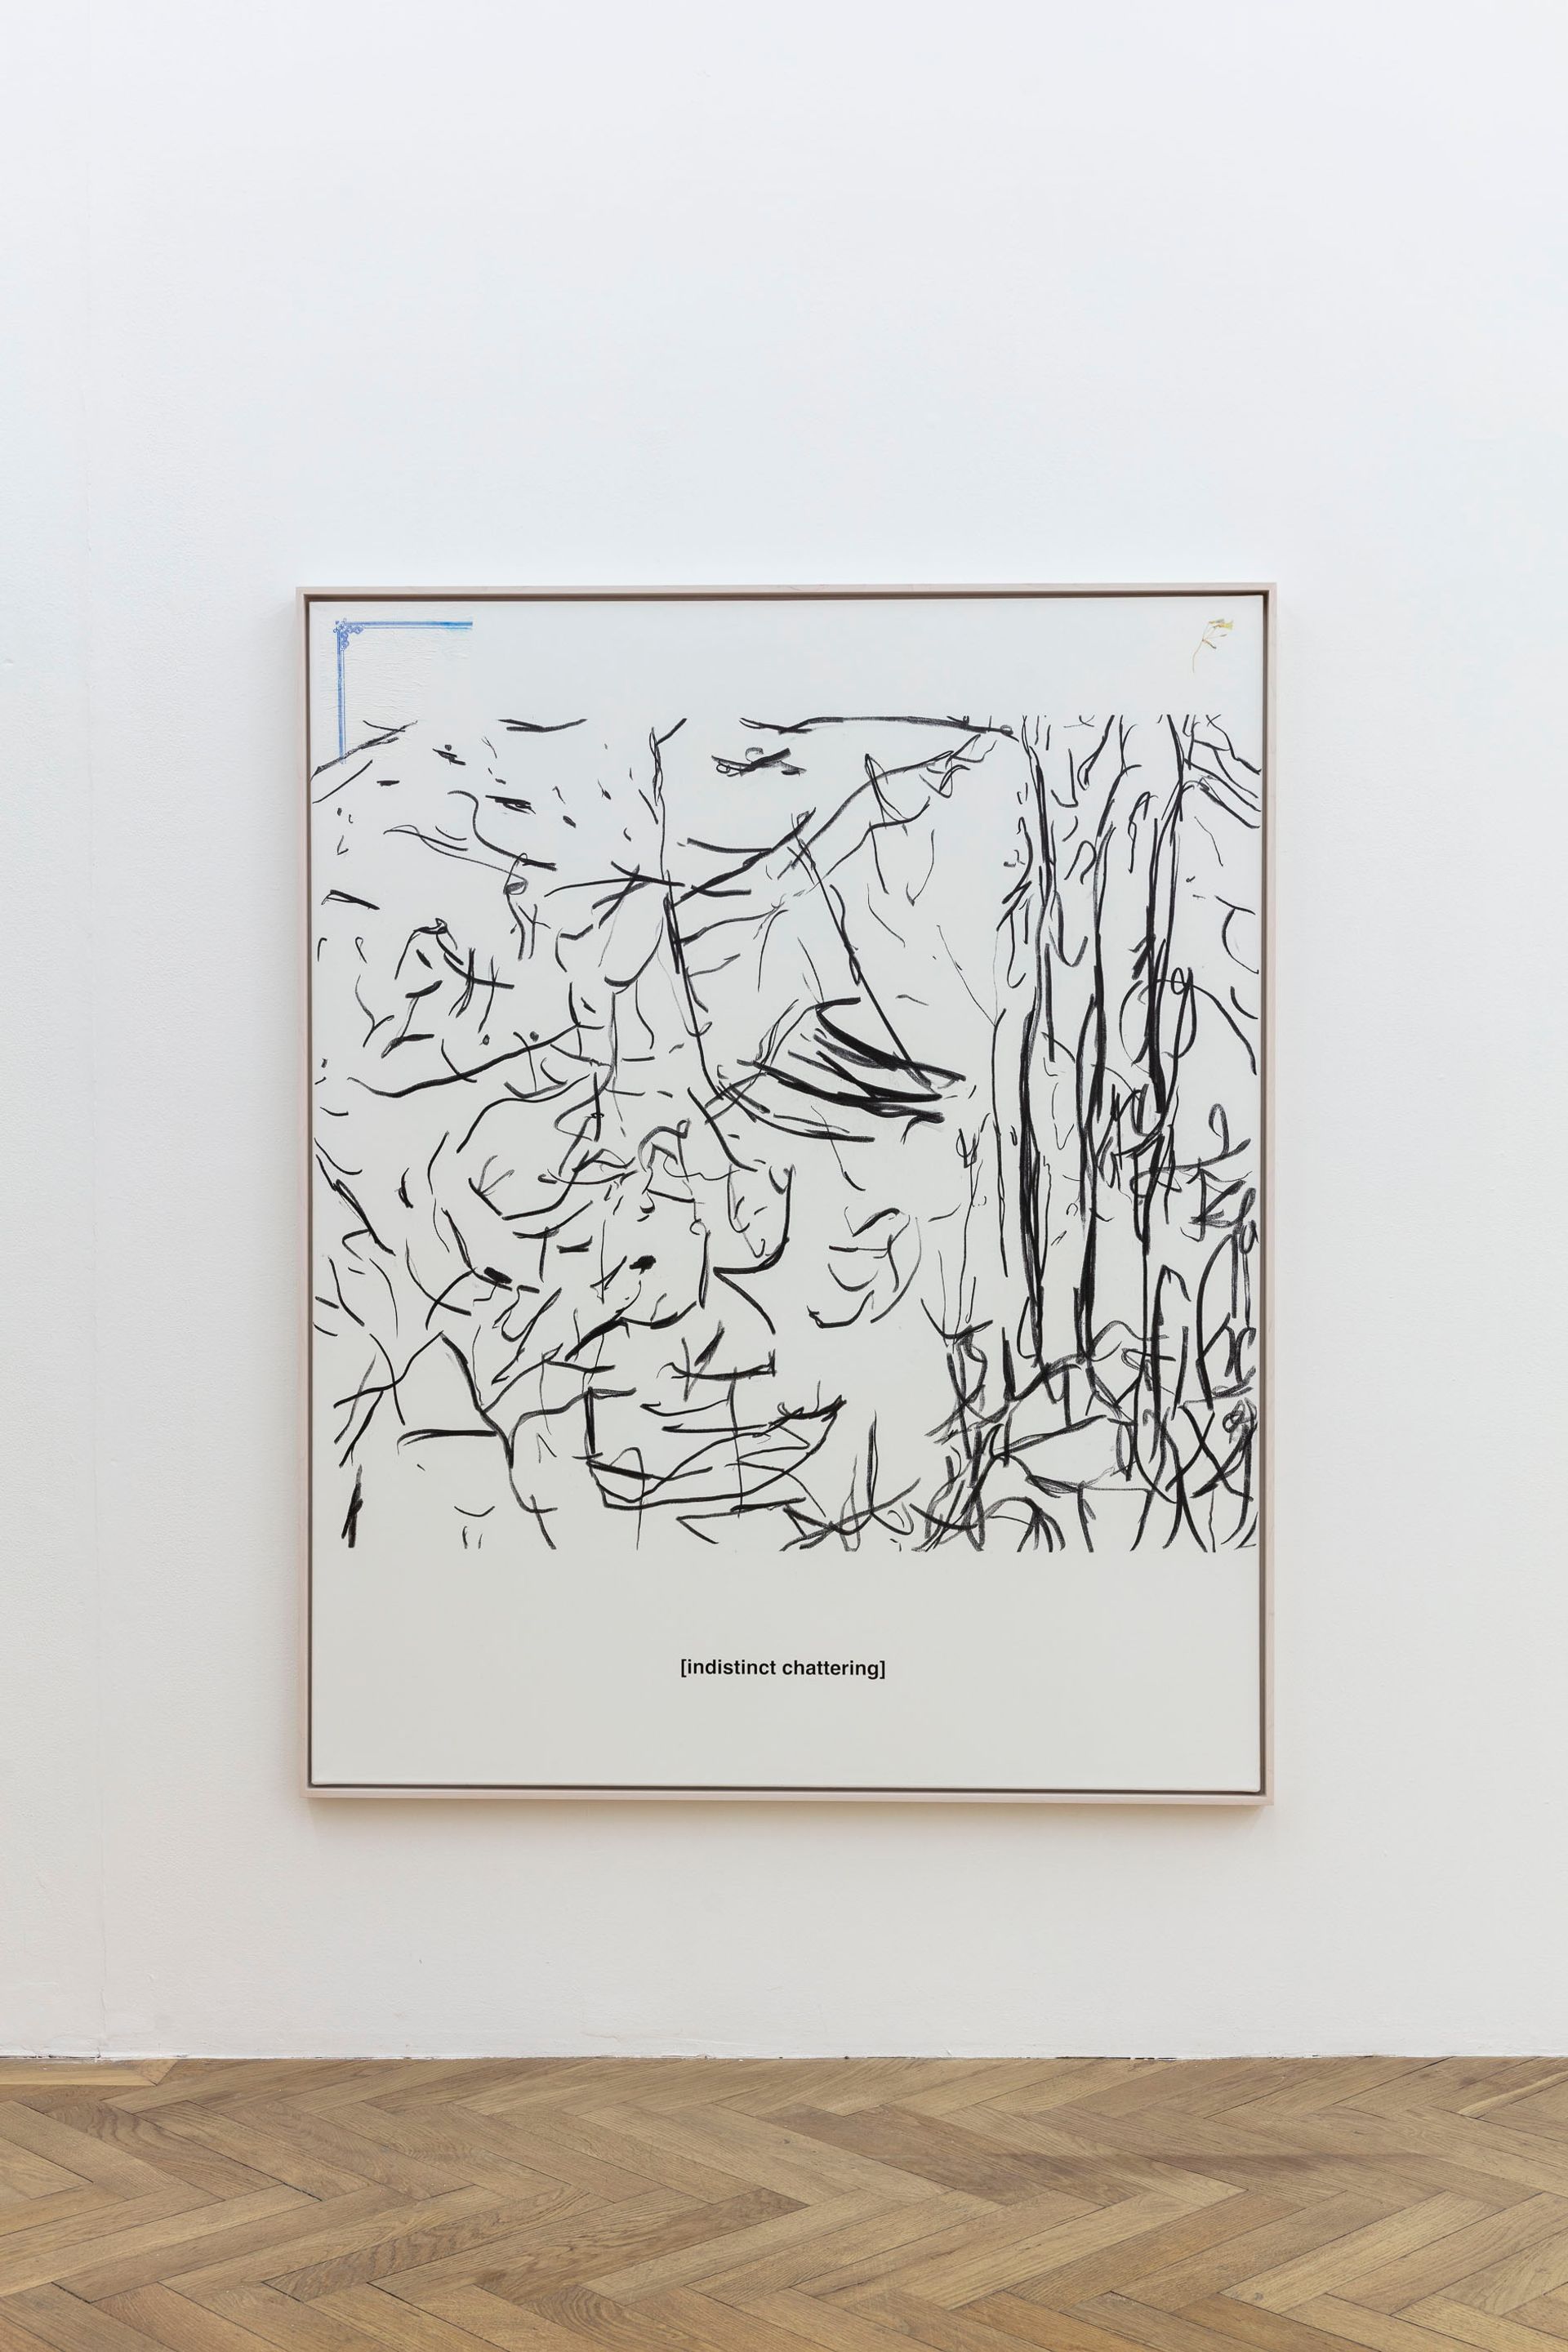 Malte Zenses, Birkenwald in Wilhelmsruh, 2023, Charcoal, paper, and acrylic on canvas, white glazed maple wood floater frame, 150 × 120 cm